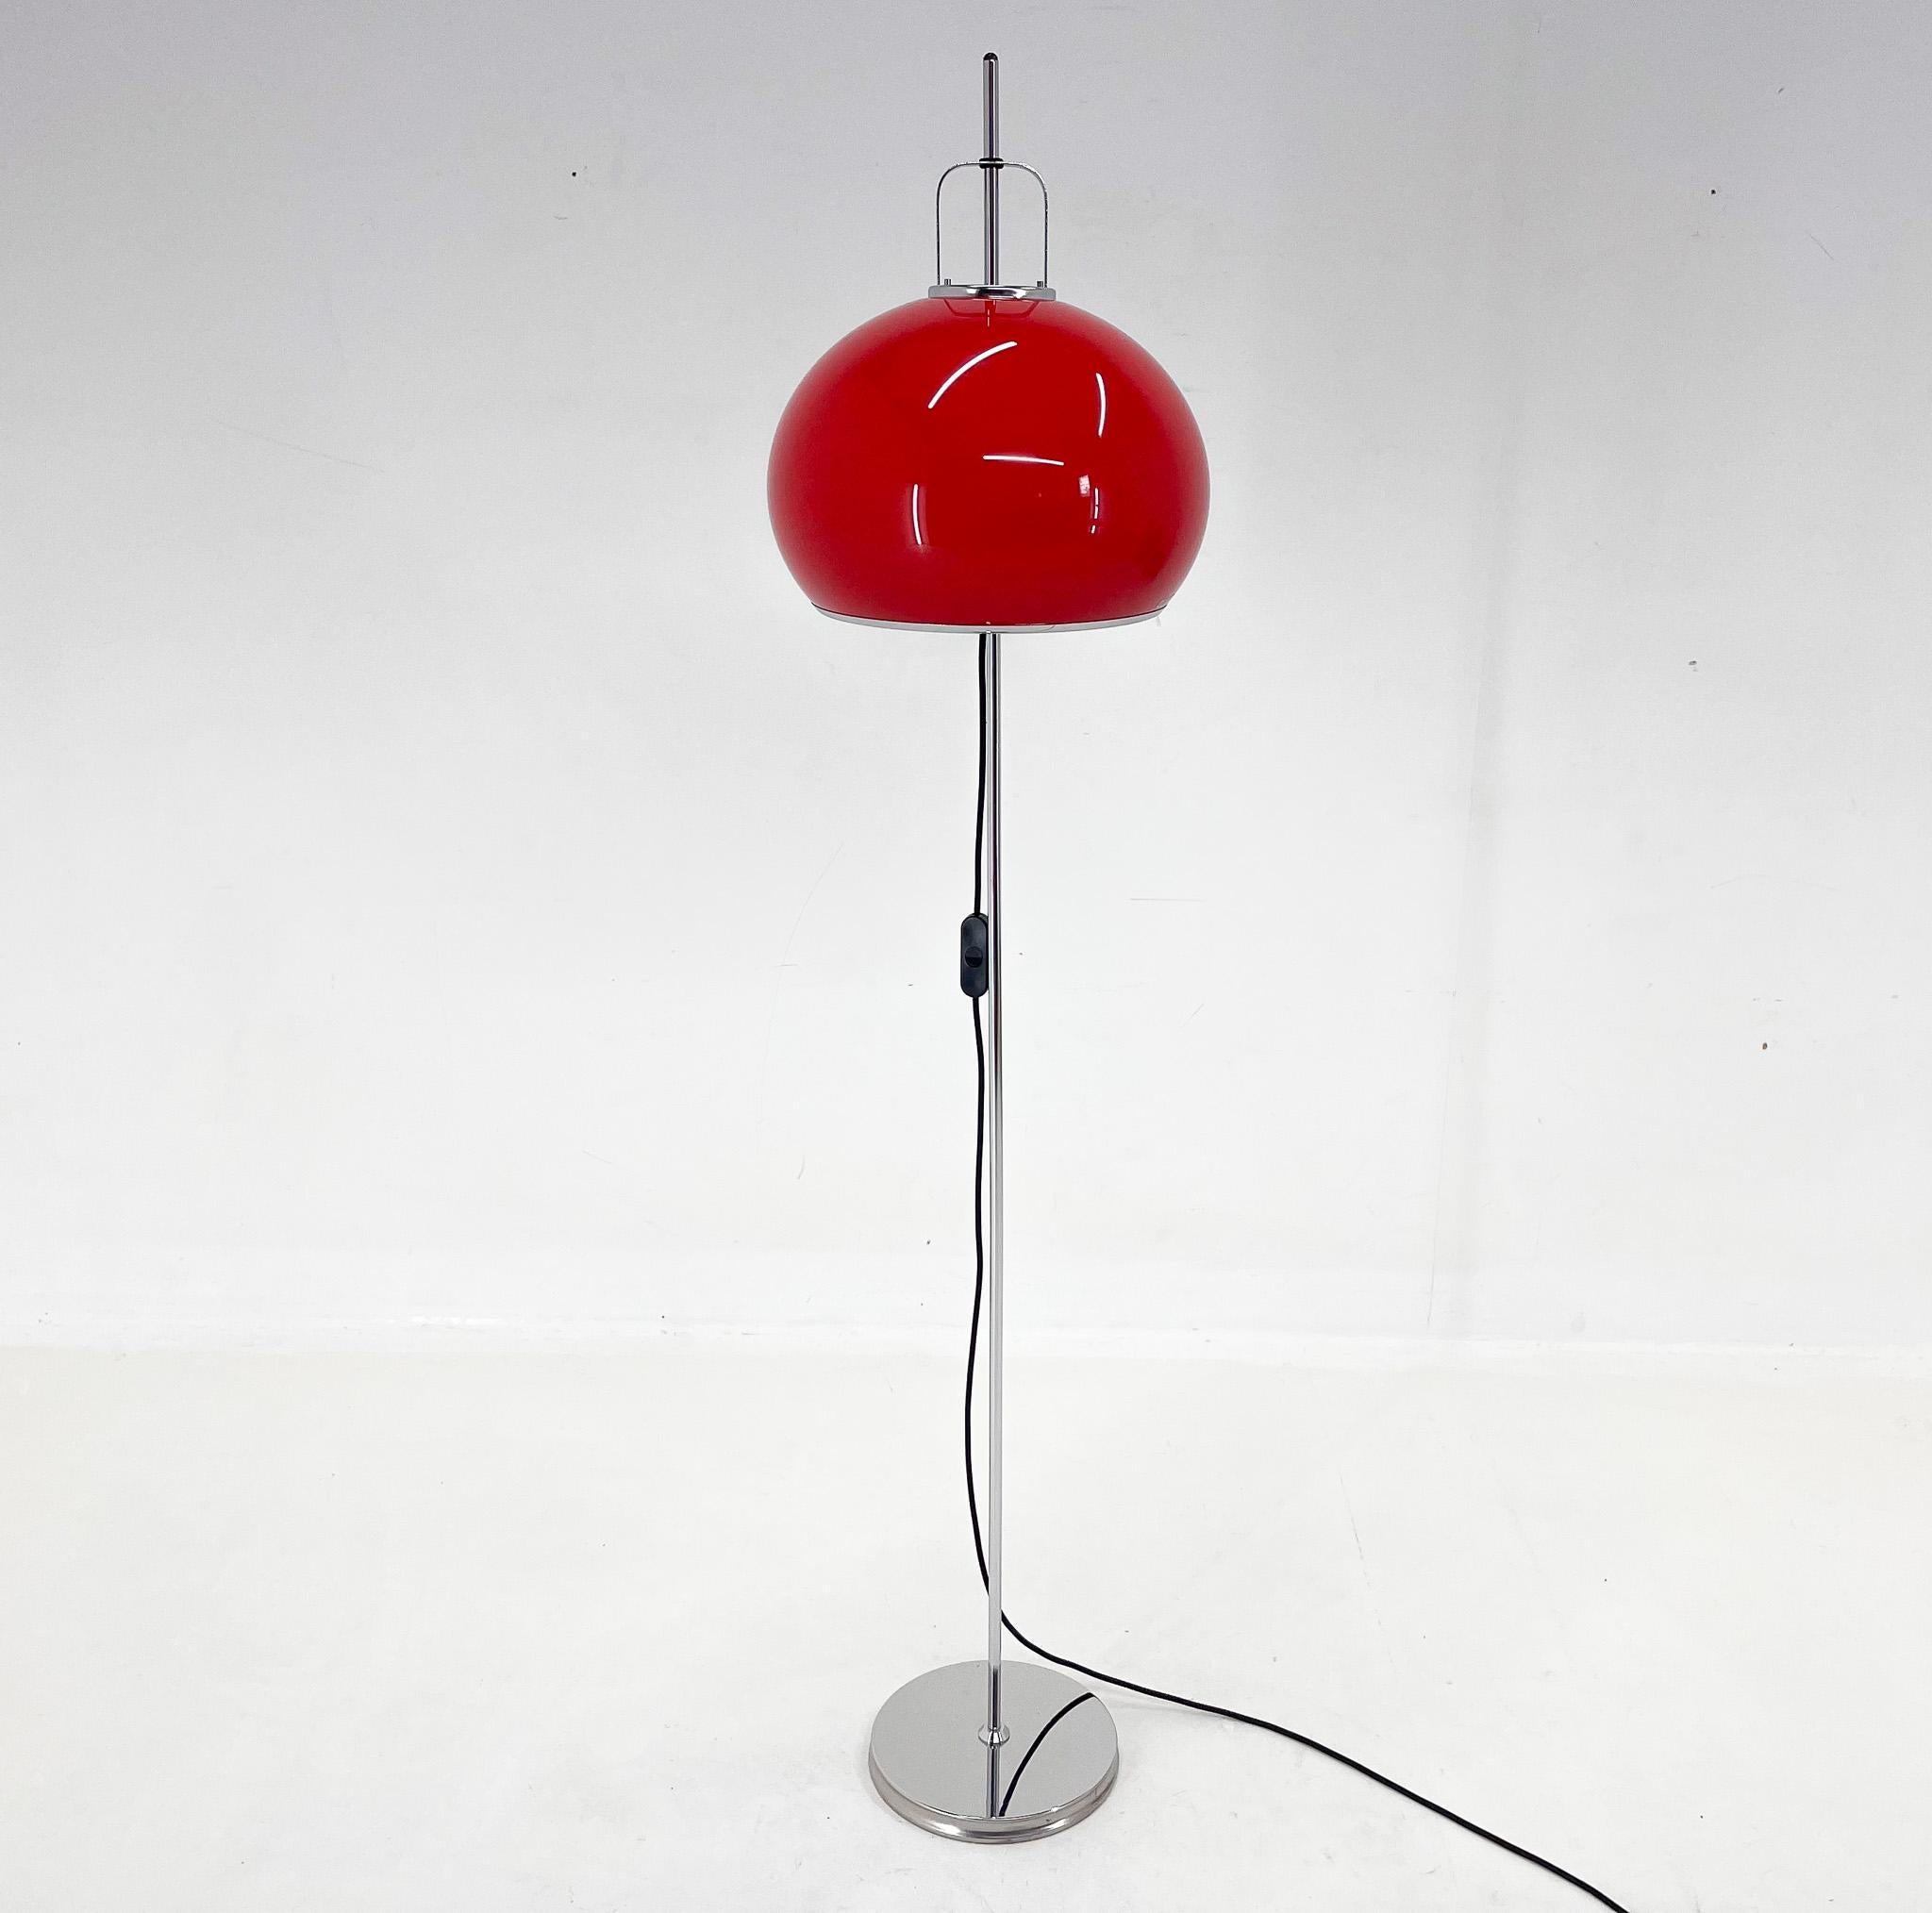 Mid-Century Modern 1970s Adjustable Floor Lamp Designed by Guzzini for Meblo, Italy  For Sale